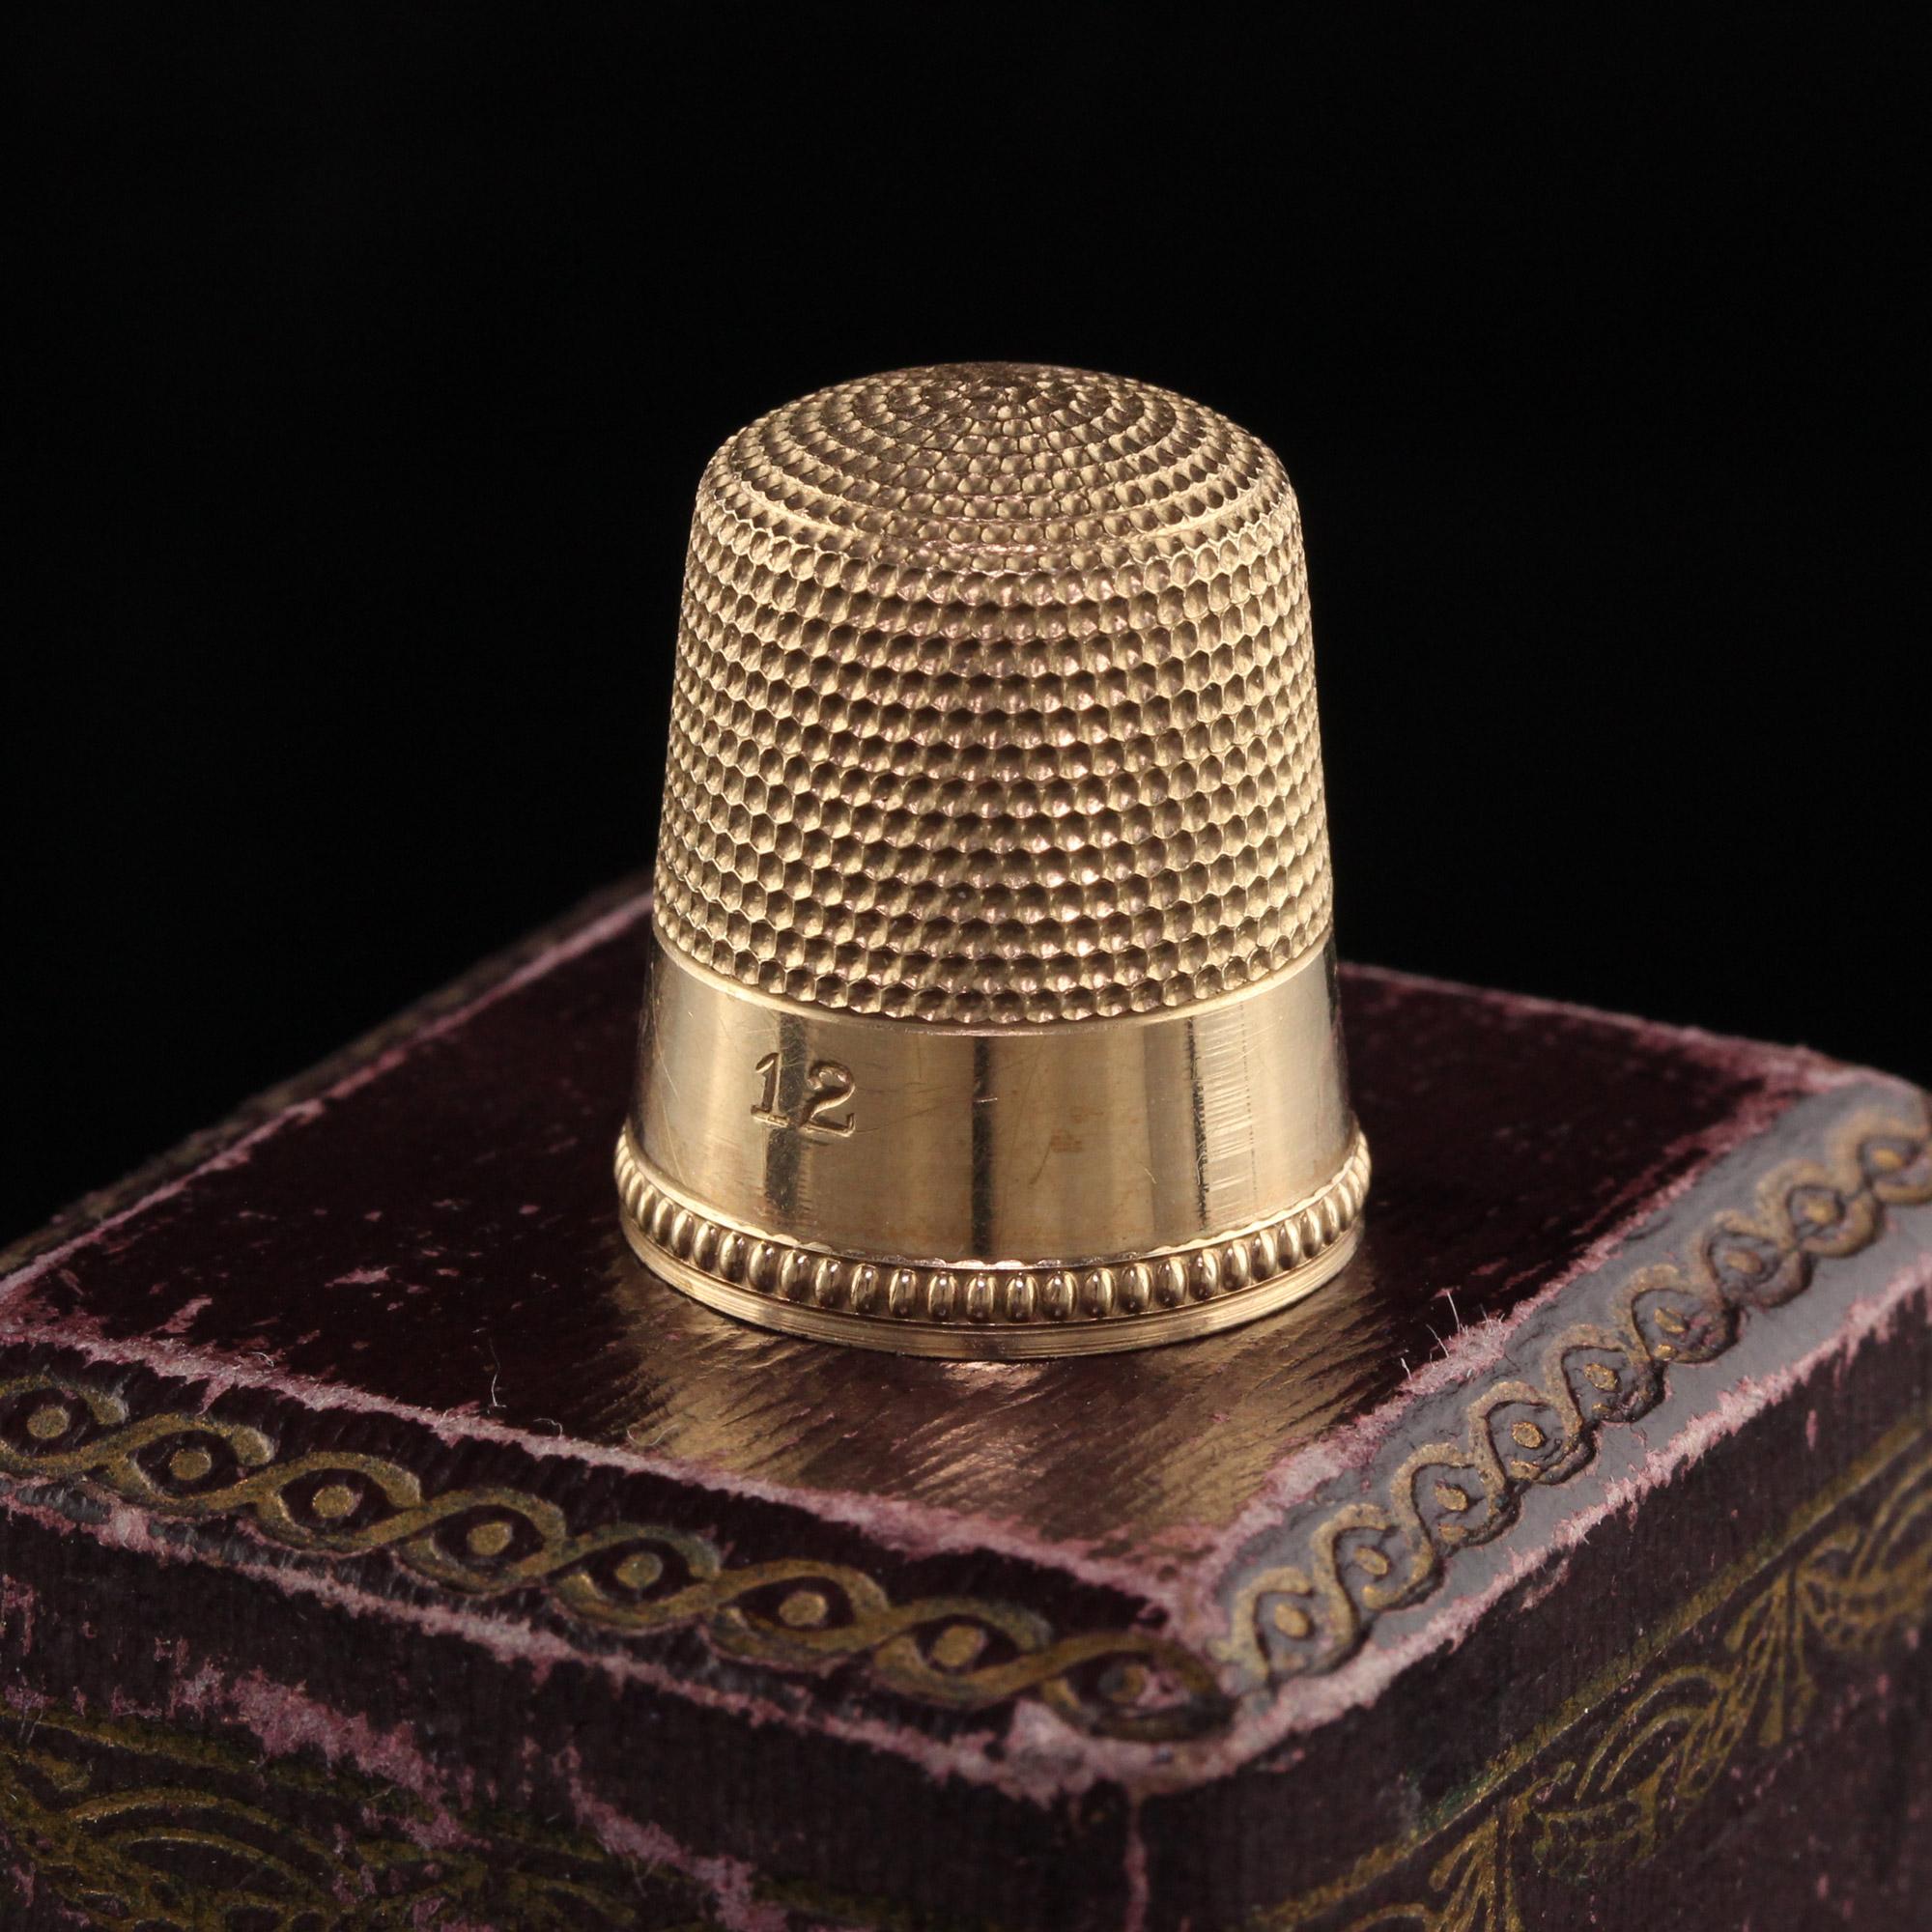 Beautiful Antique Victorian 12K Yellow Gold J. E. Caldwell Thimble. This beautiful piece is crafted in 12k yellow gold. This thimble is beautifully engraved and in amazing condition.

Item #MISC0003

Metal: 12K Yellow Gold

Weight: 4.1 Grams

Size: